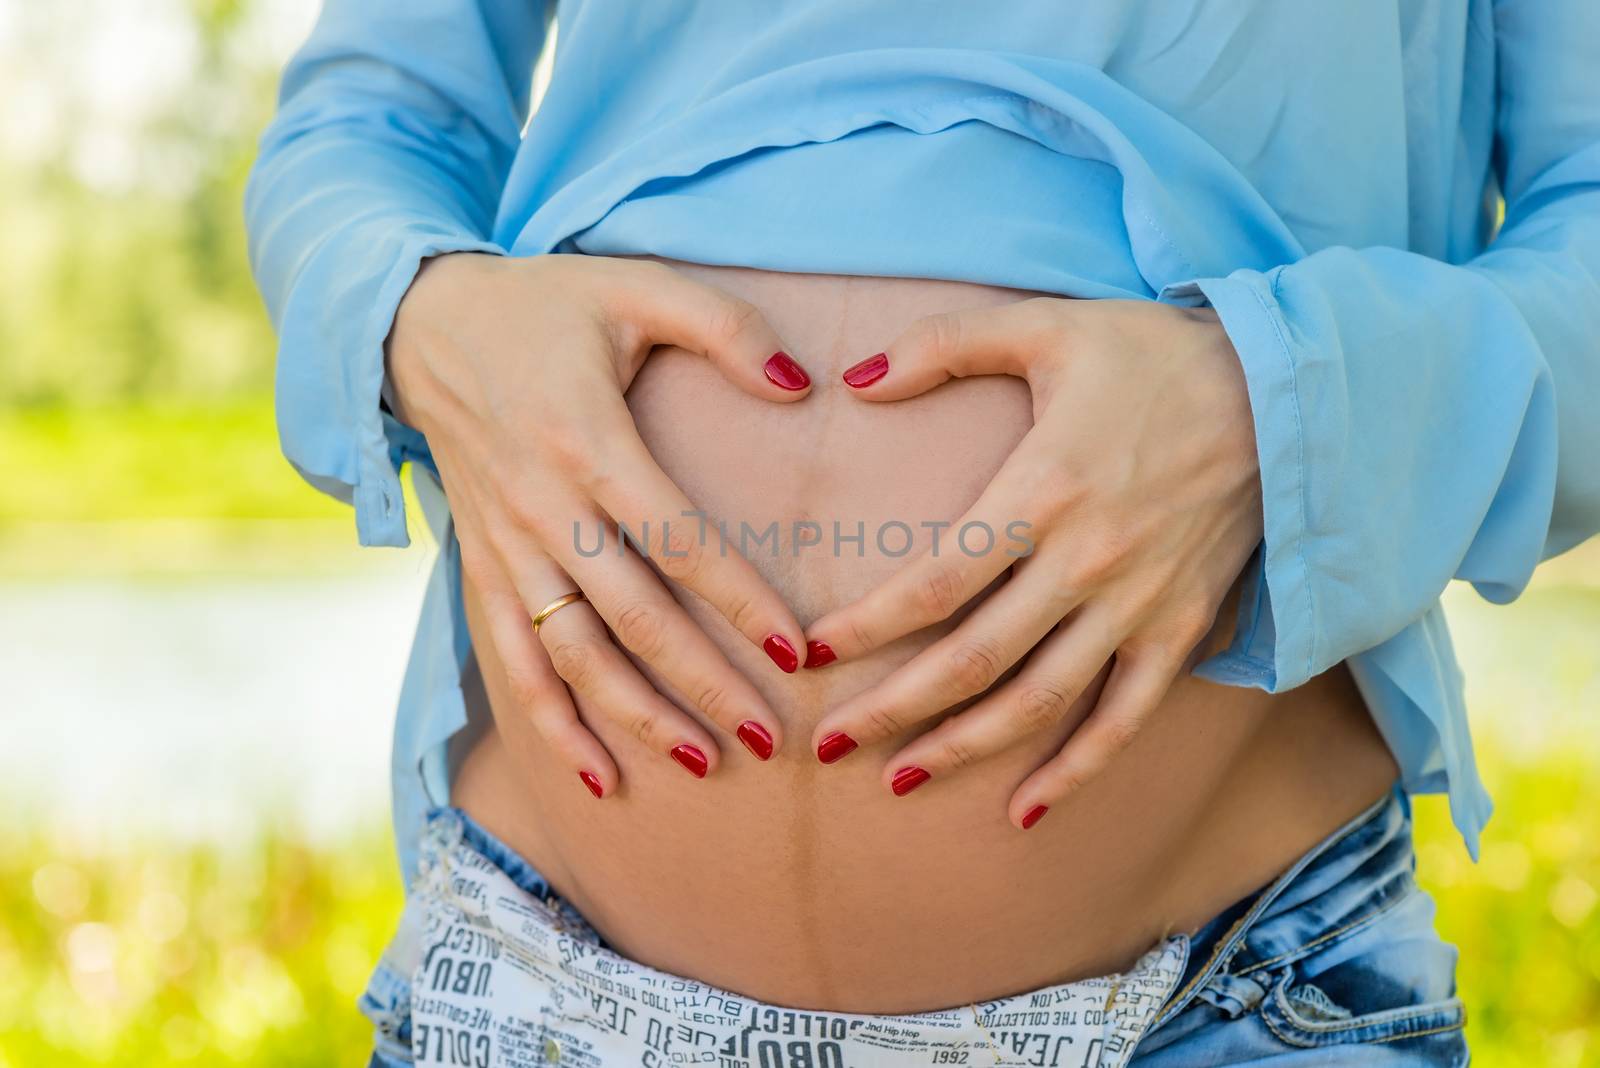 Hands in the shape of a heart on the belly of a pregnant woman c by kosmsos111